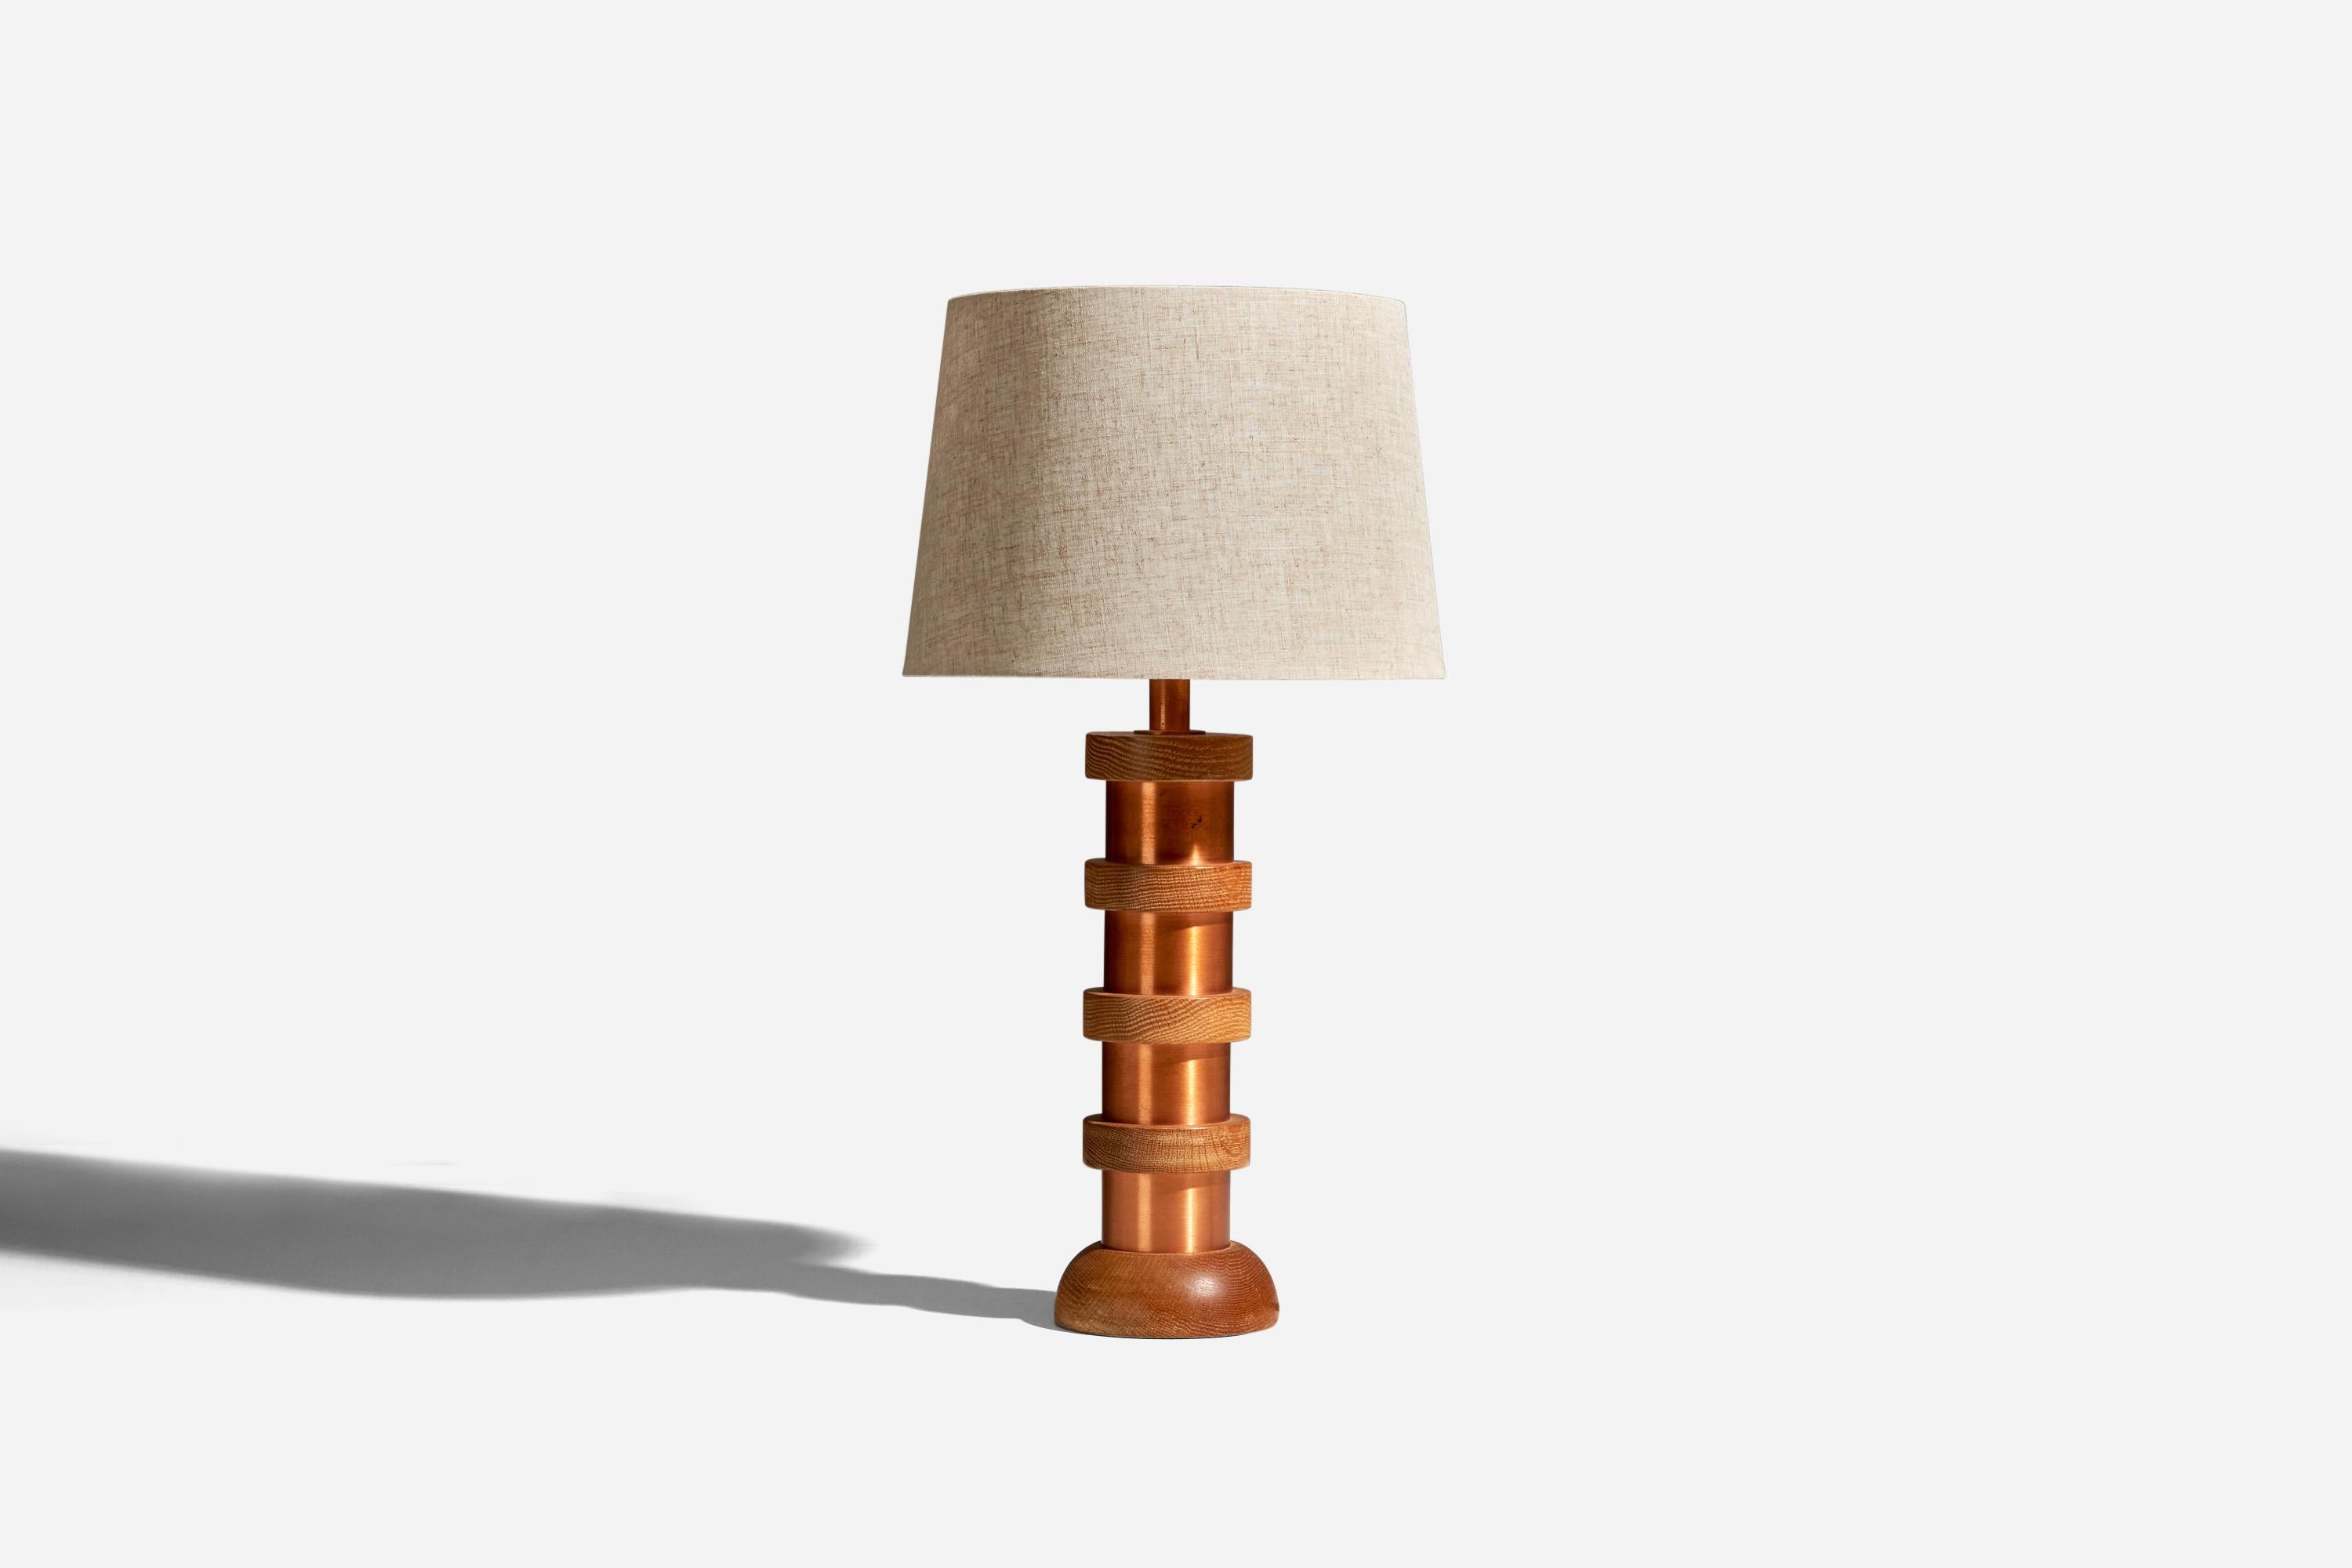 A copper and oak table lamp designed and produced by an American Designer, USA, 1950s.

Sold with Lampshade. Dimensions stated are of Table Lamp with Lampshade. 

Socket takes standard E-26 medium base bulb.

There is no maximum wattage stated